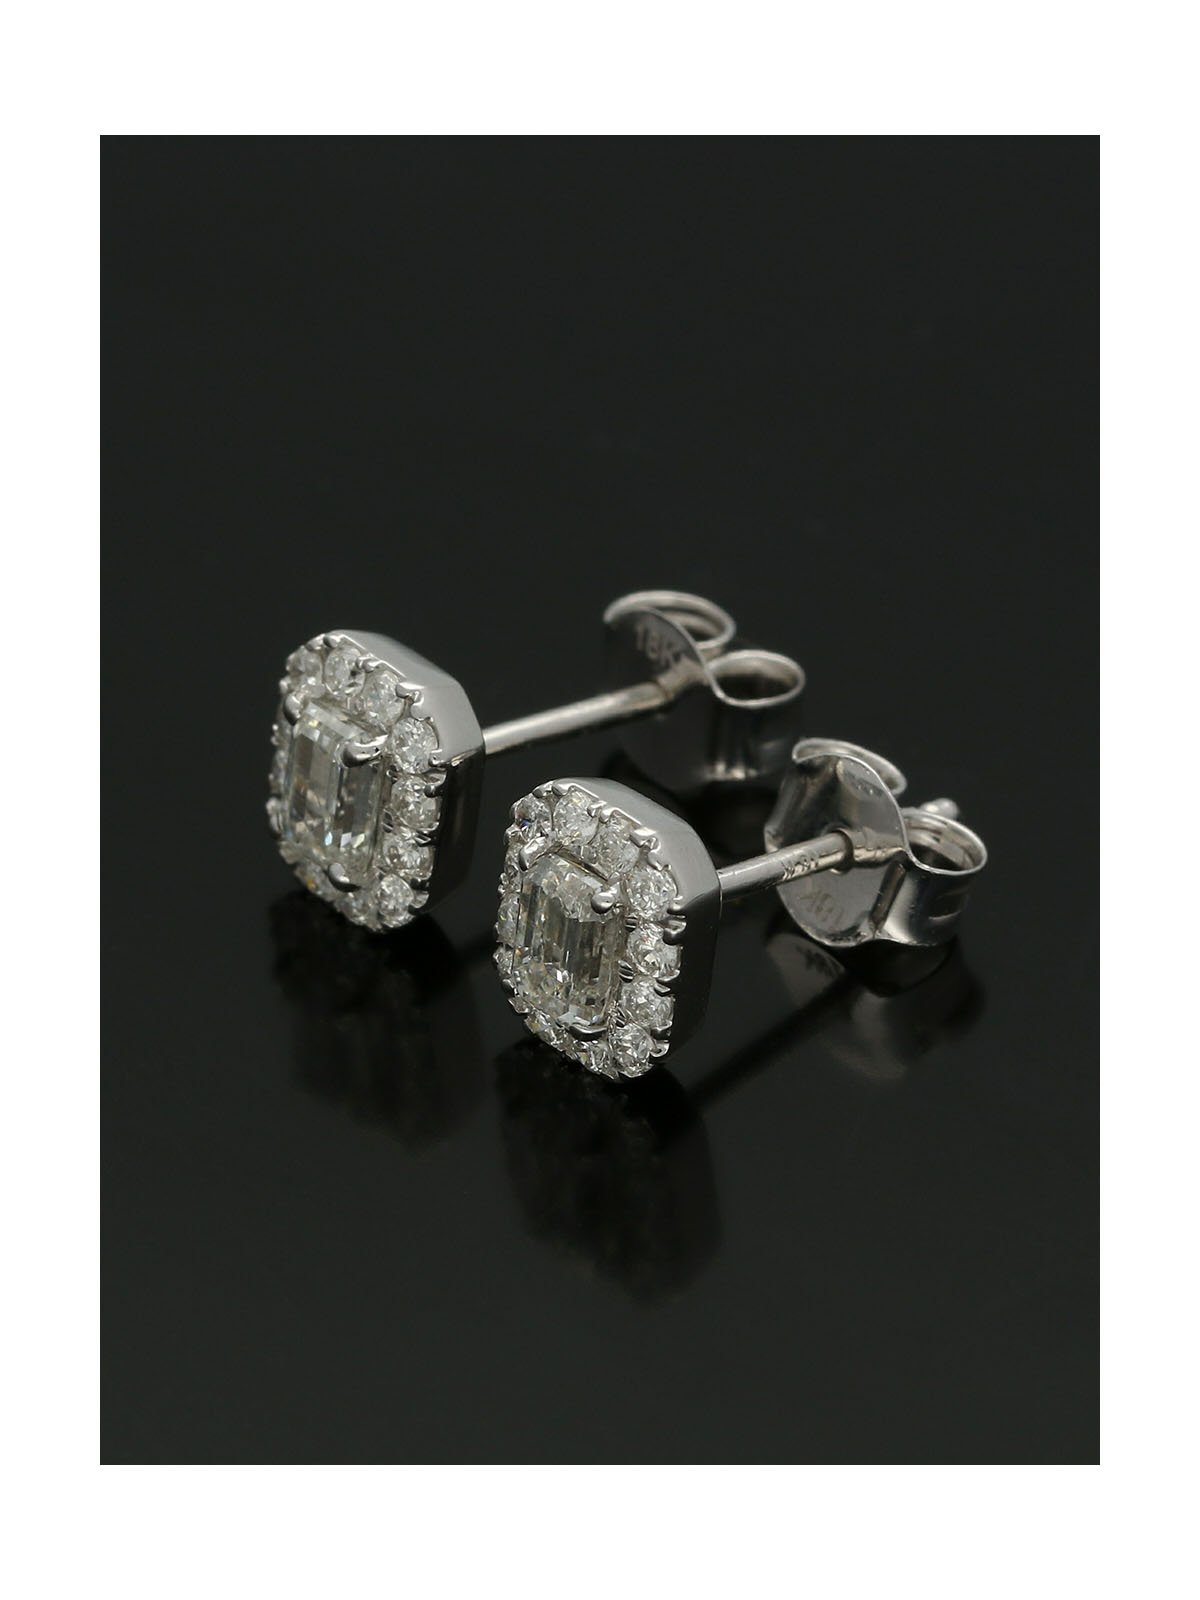 Diamond Cluster Stud Earrings 0.88ct Emerald & Round Brilliant Cut in 18ct White Gold